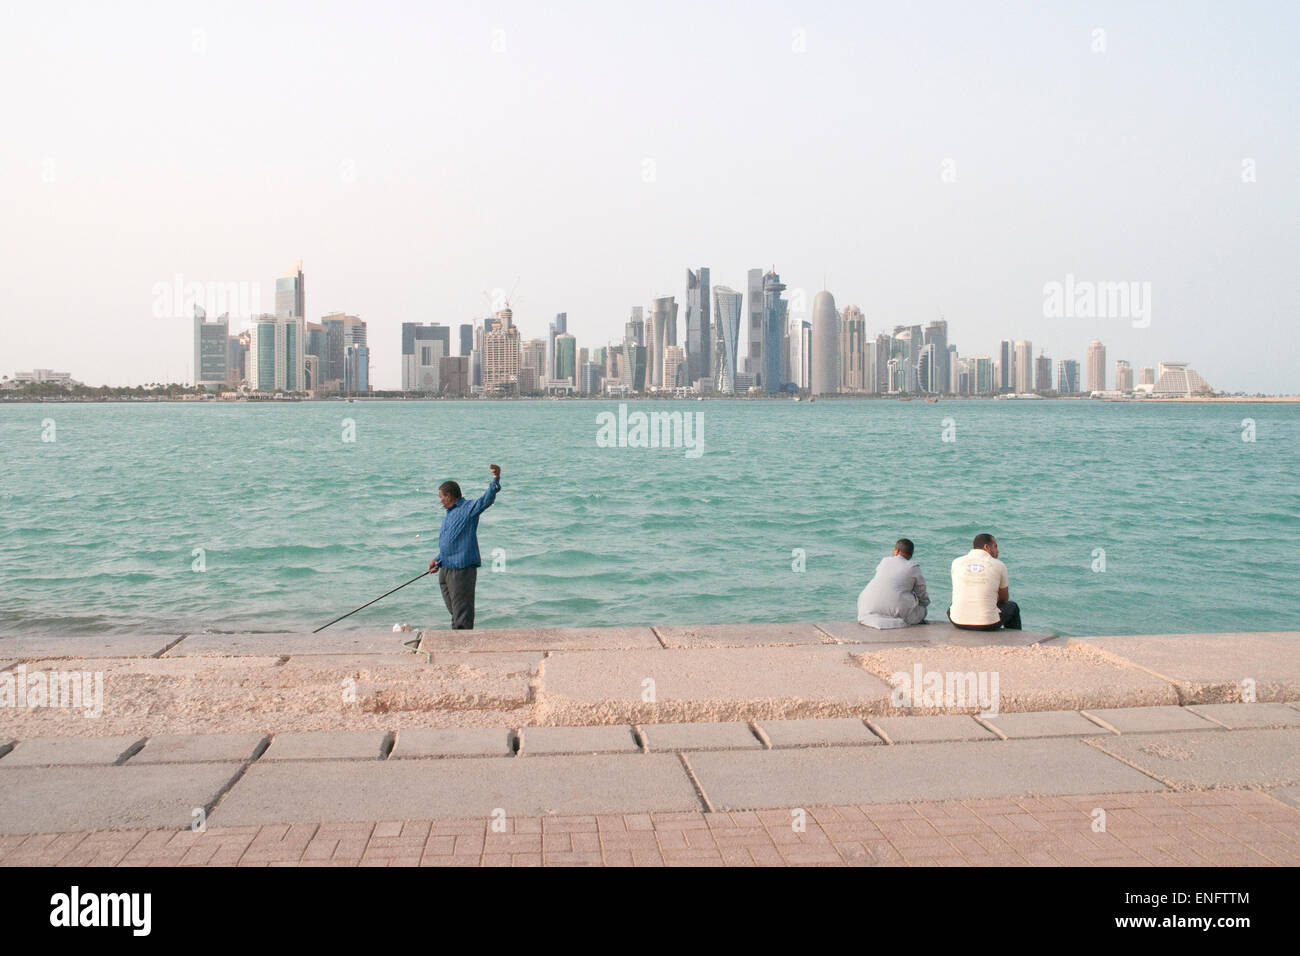 Three South Asian men passing time on the waterfront corniche in Doha, Qatar, with the city skyline seen in the background. Stock Photo